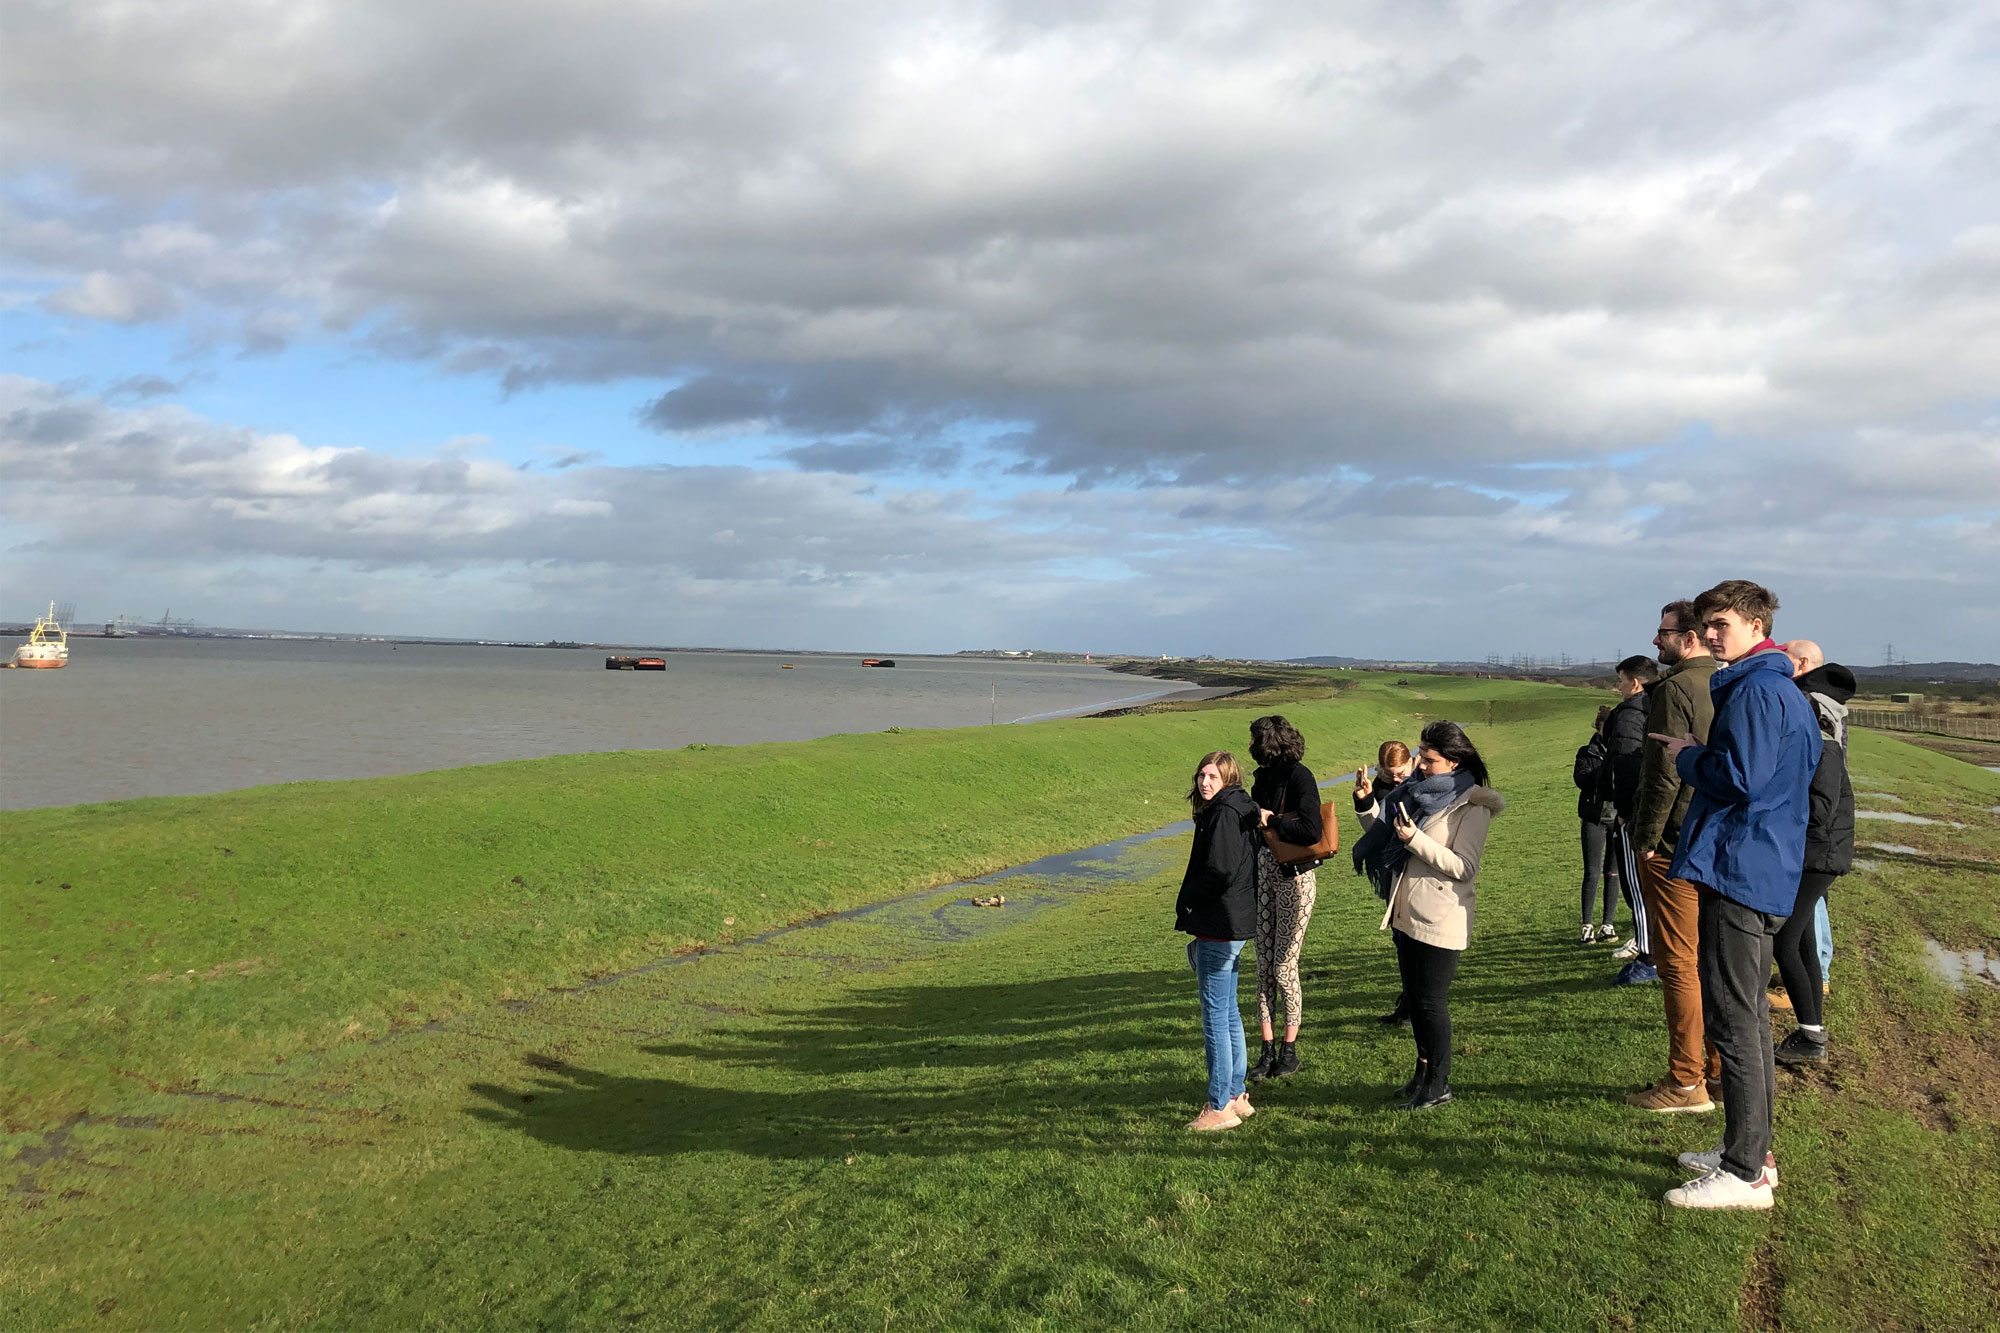 Human Geography students at river Thames flood barrier